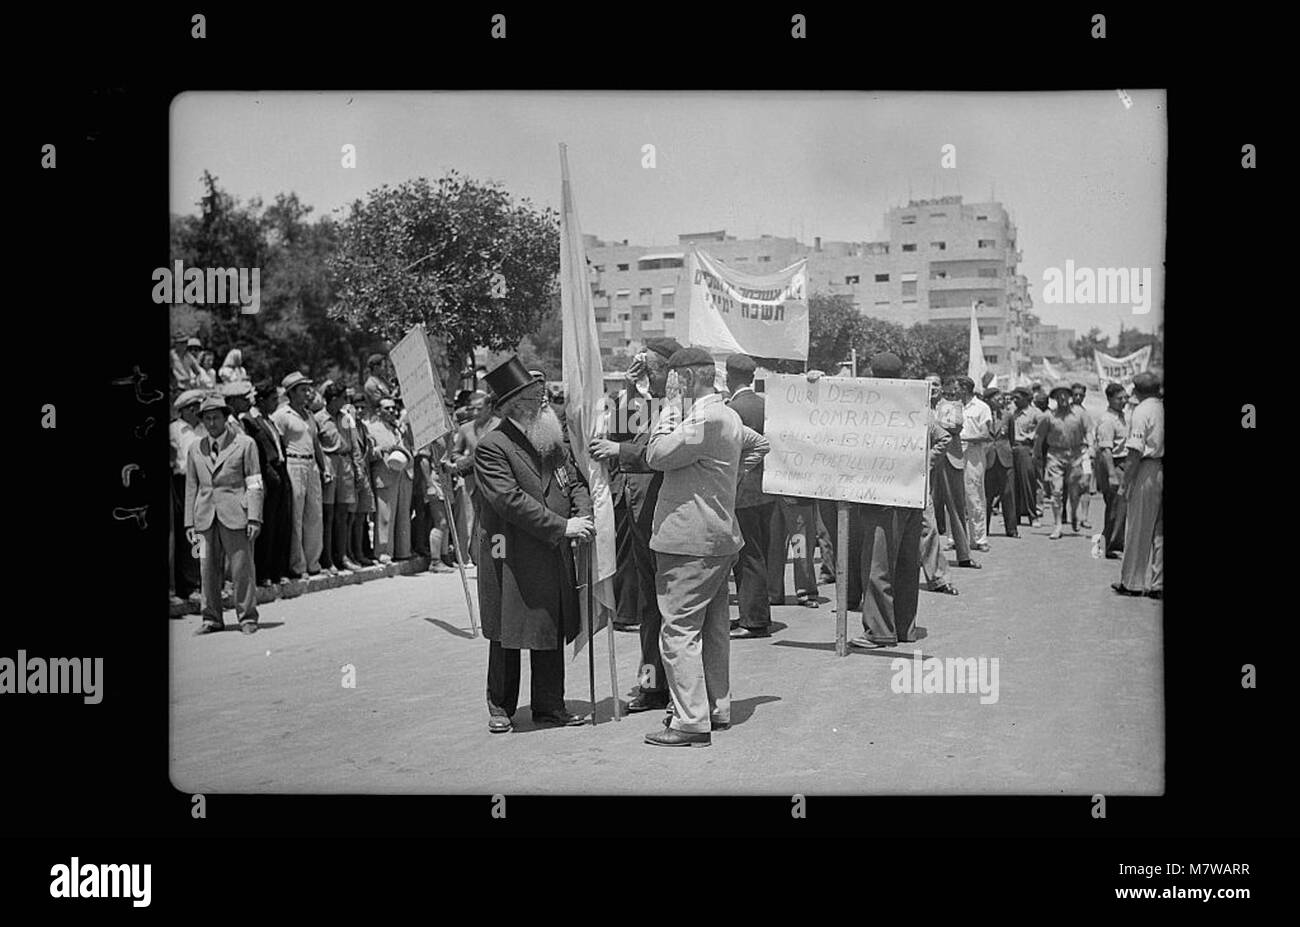 Jewish protest demonstrations against Palestine White Paper, May 18, 1939. Great War legionaries with their veteran chaplain parading on King George Ave. carrying appropriate slogans LOC matpc.18340 Stock Photo